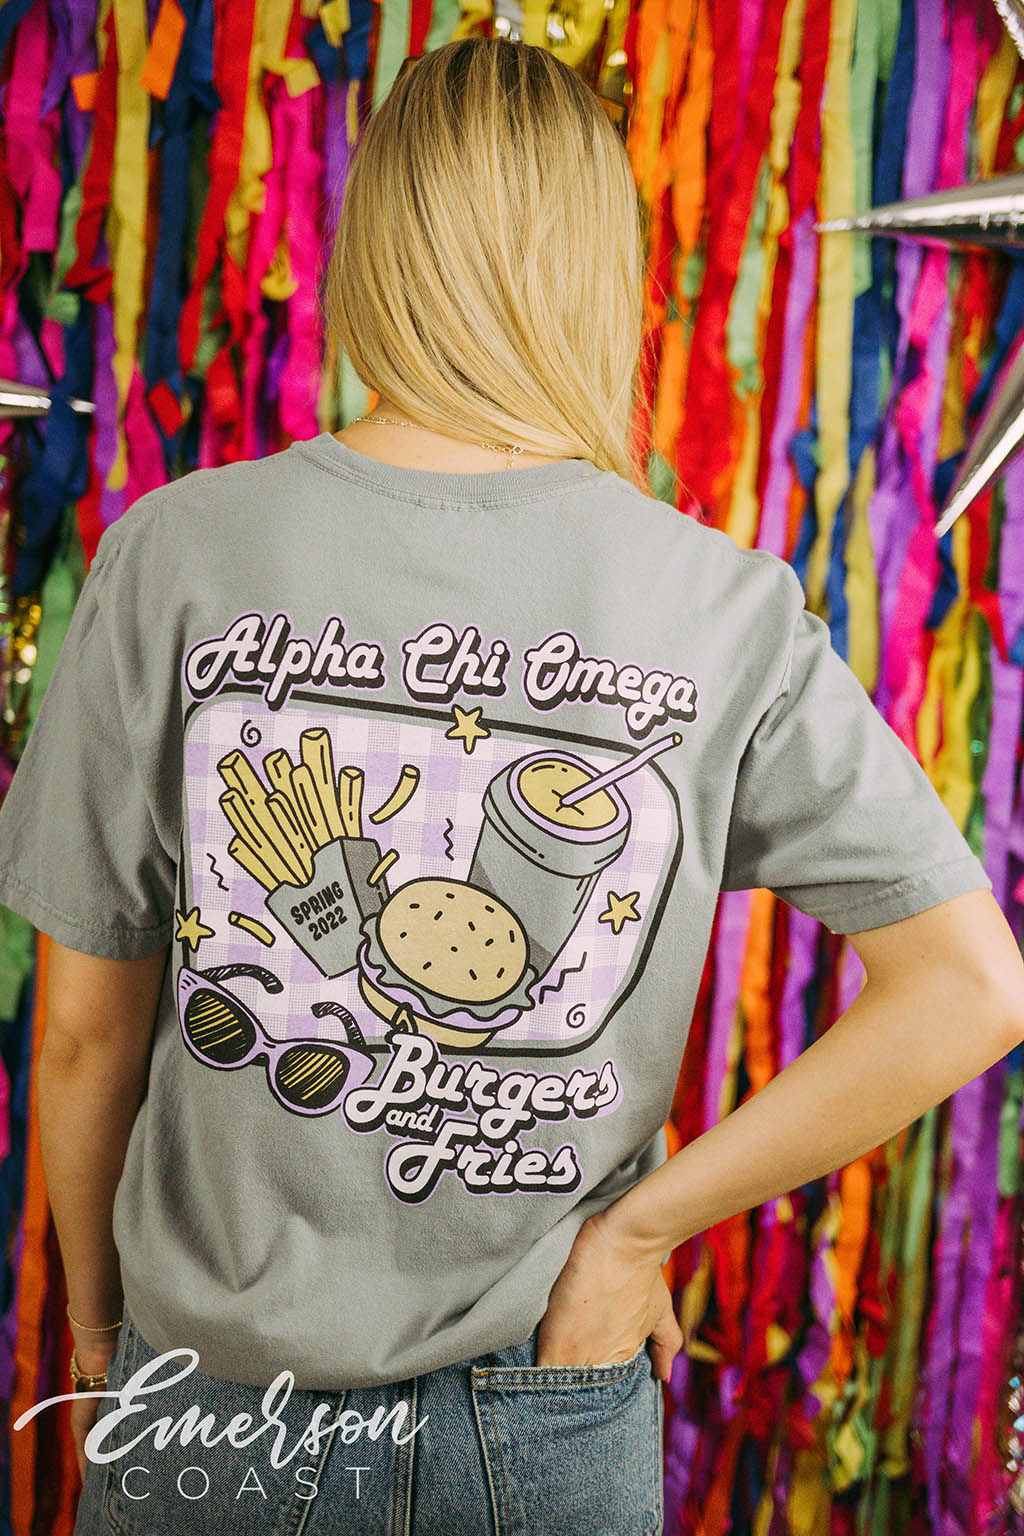 Alpha Chi Omega Philanthropy Burgers and Fries Tee